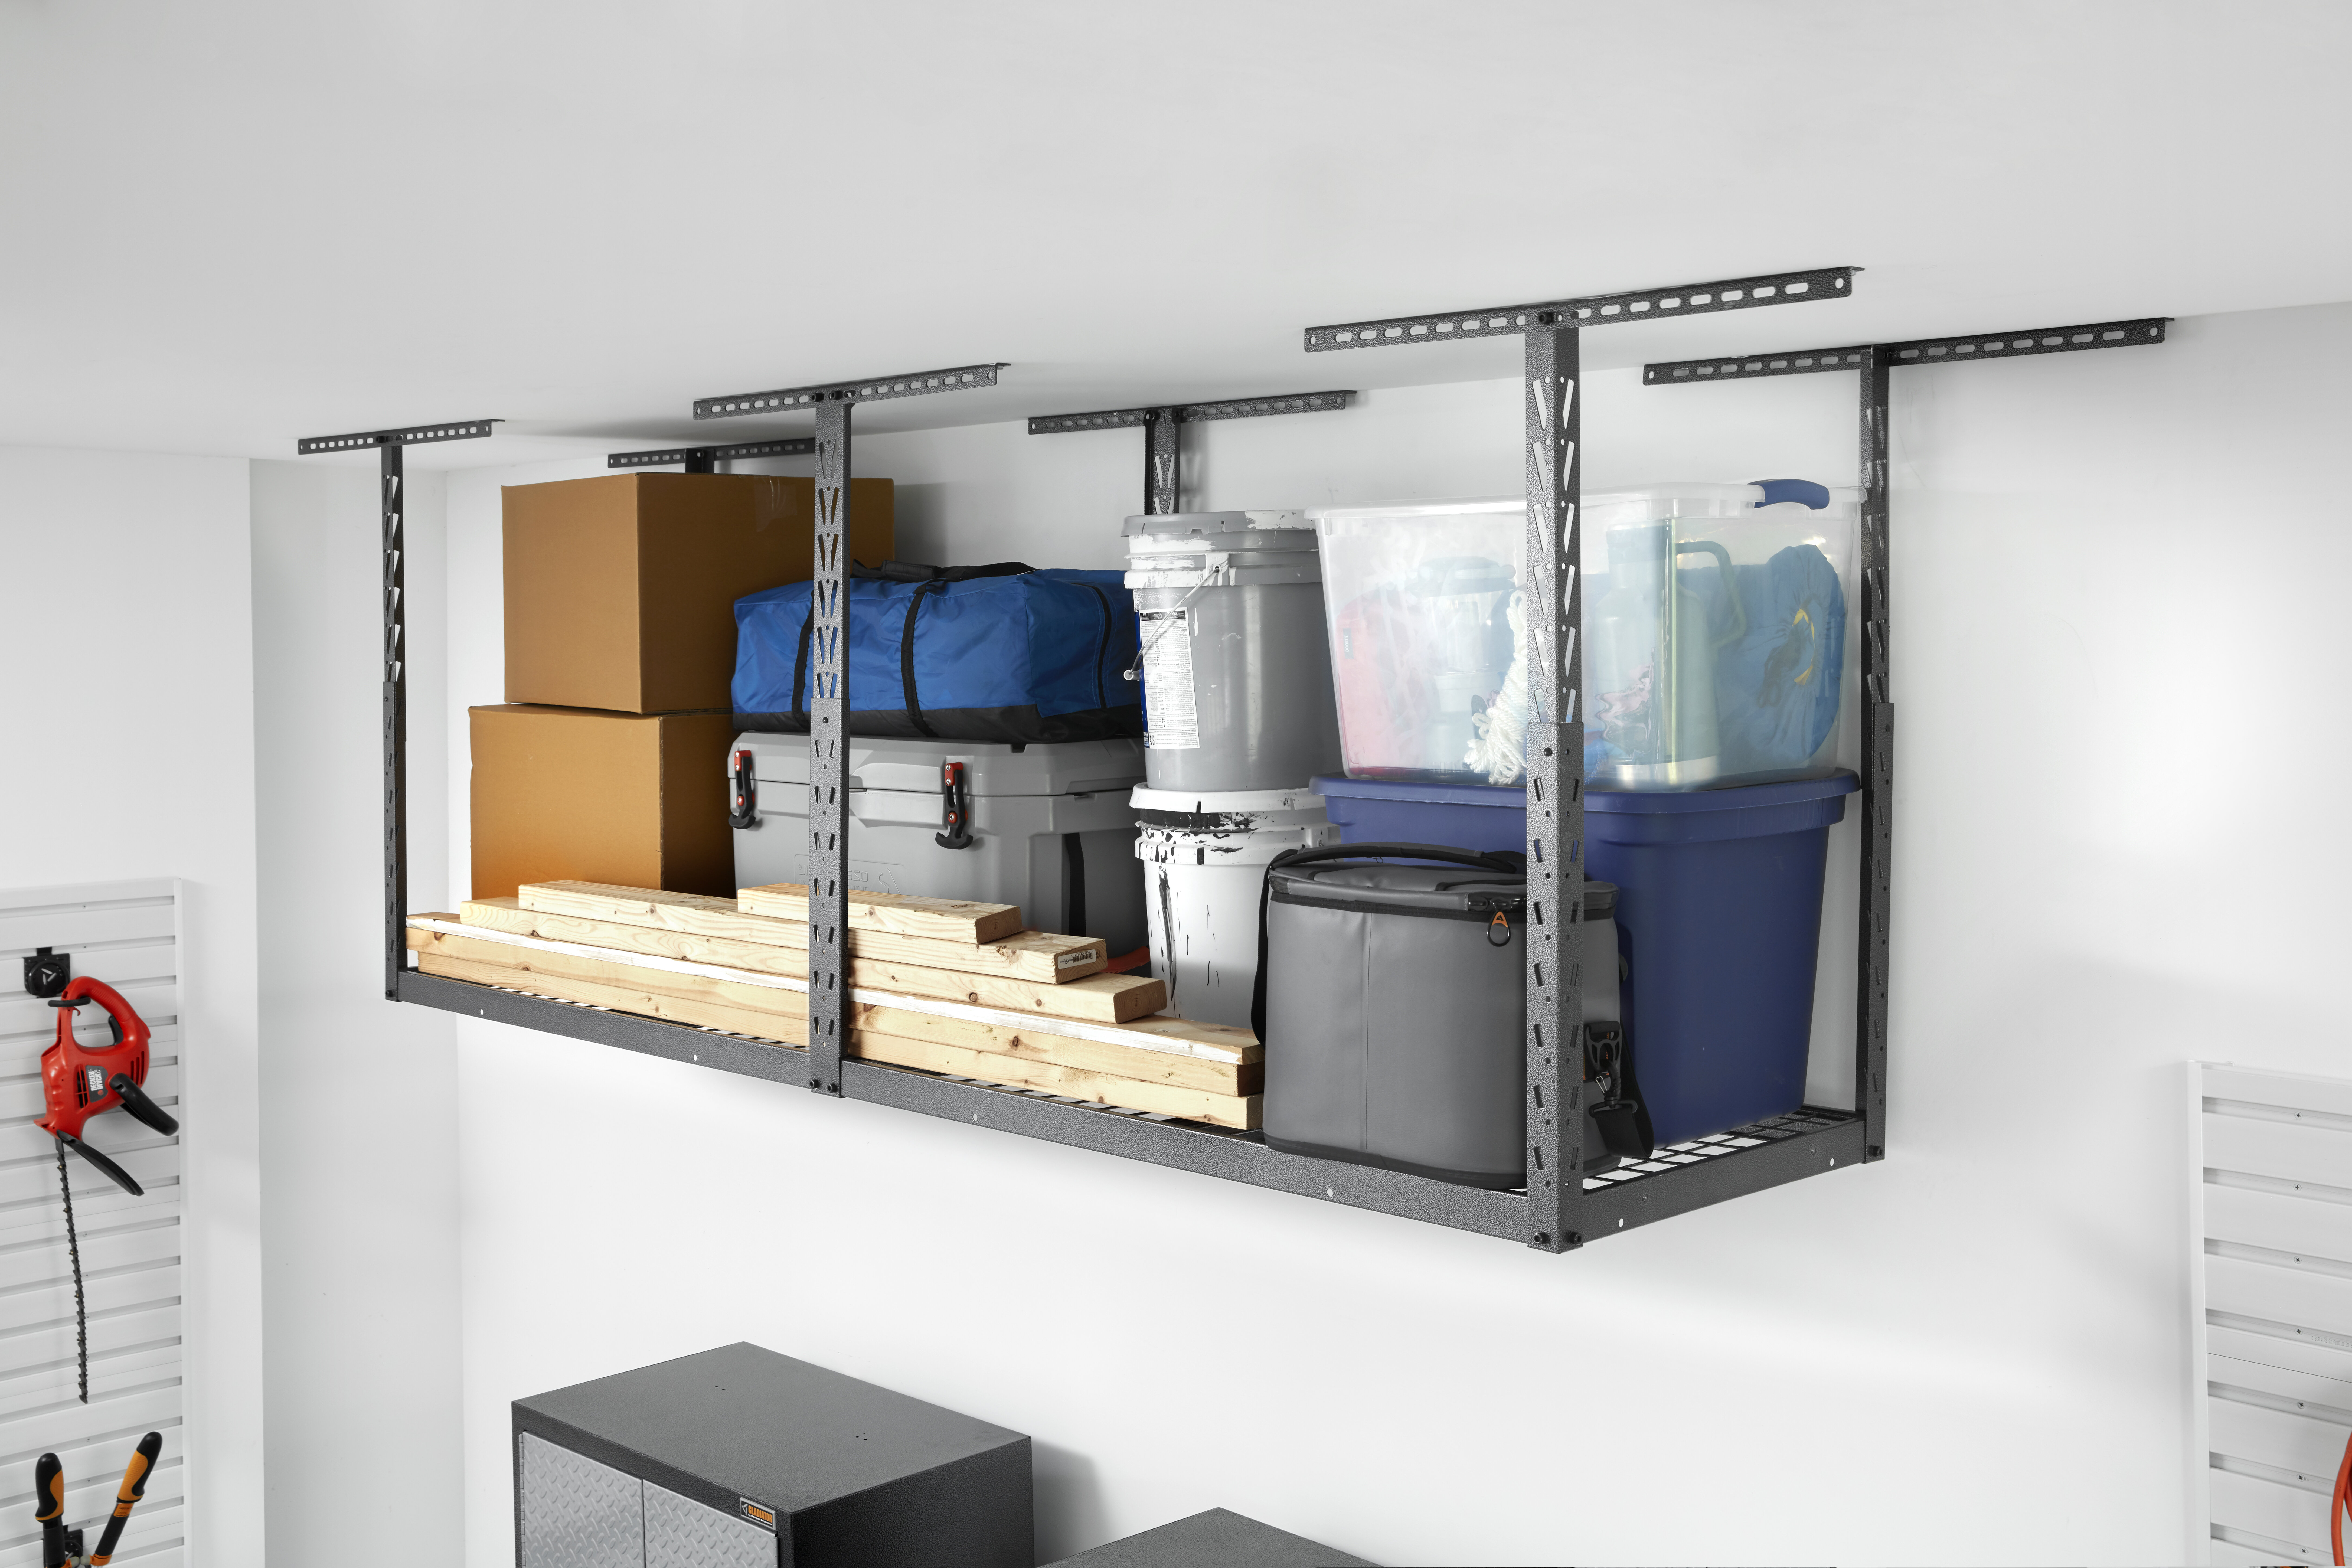 Garage Organizers, Overhead Storage, Shelving, & Wall Systems